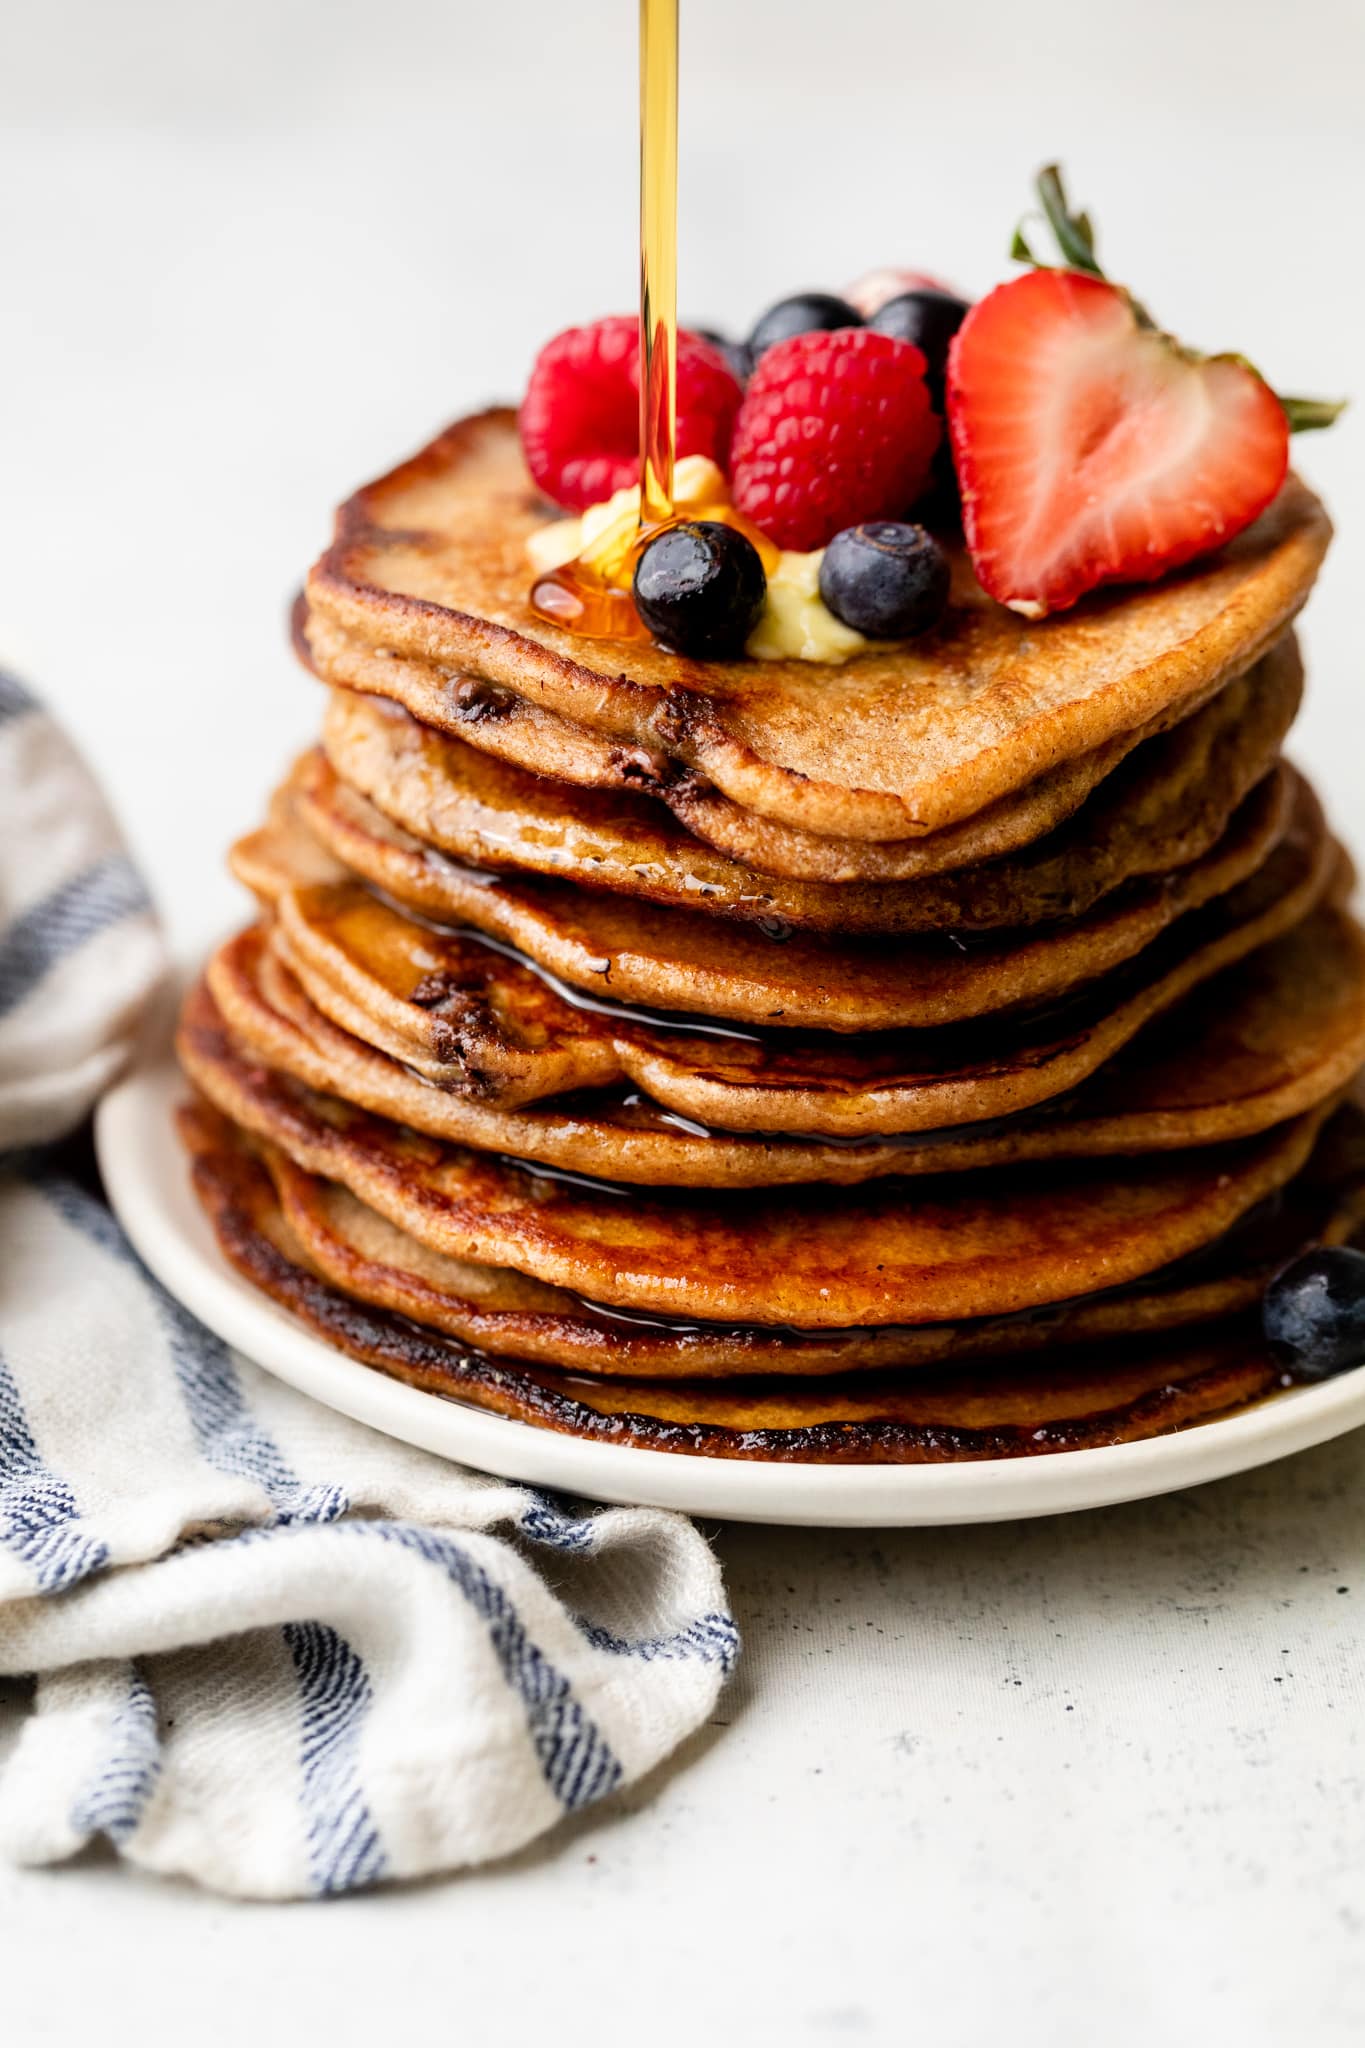 Easy Oatmeal Pancakes - All the Healthy Things